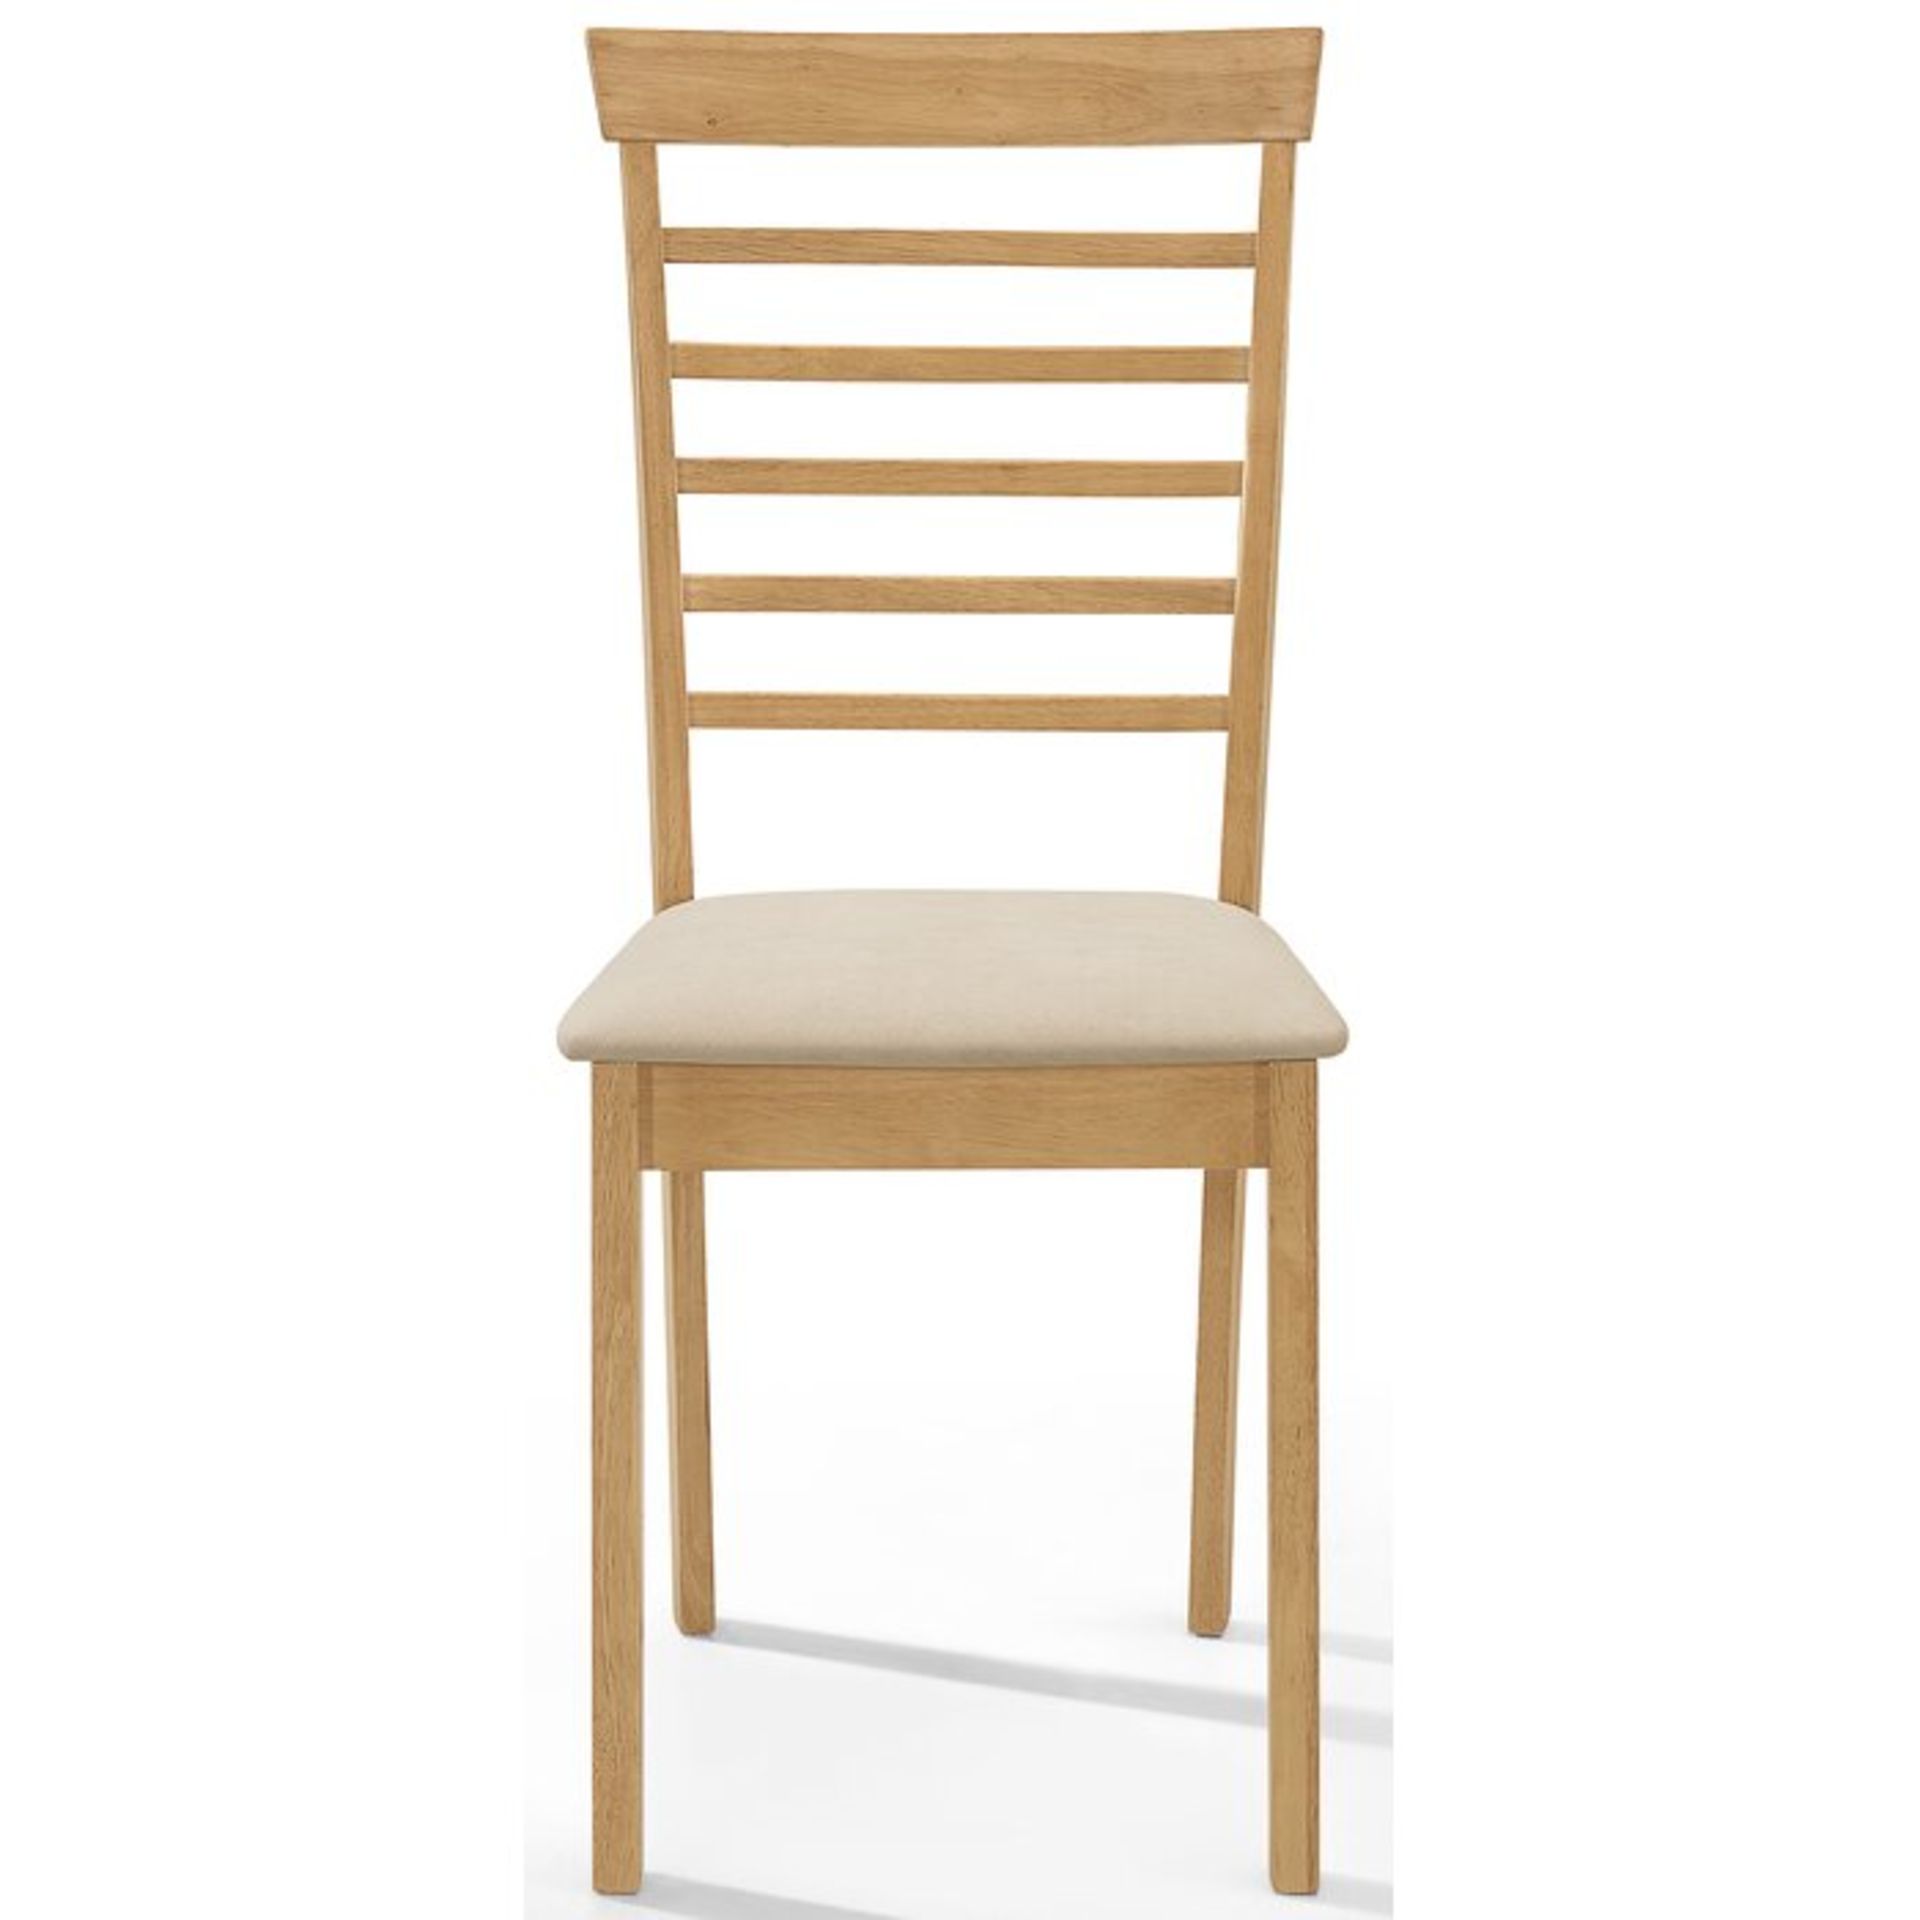 Mcneil Upholstered Dining Chair (Set of 2) - RRP £83.99 - Image 2 of 2